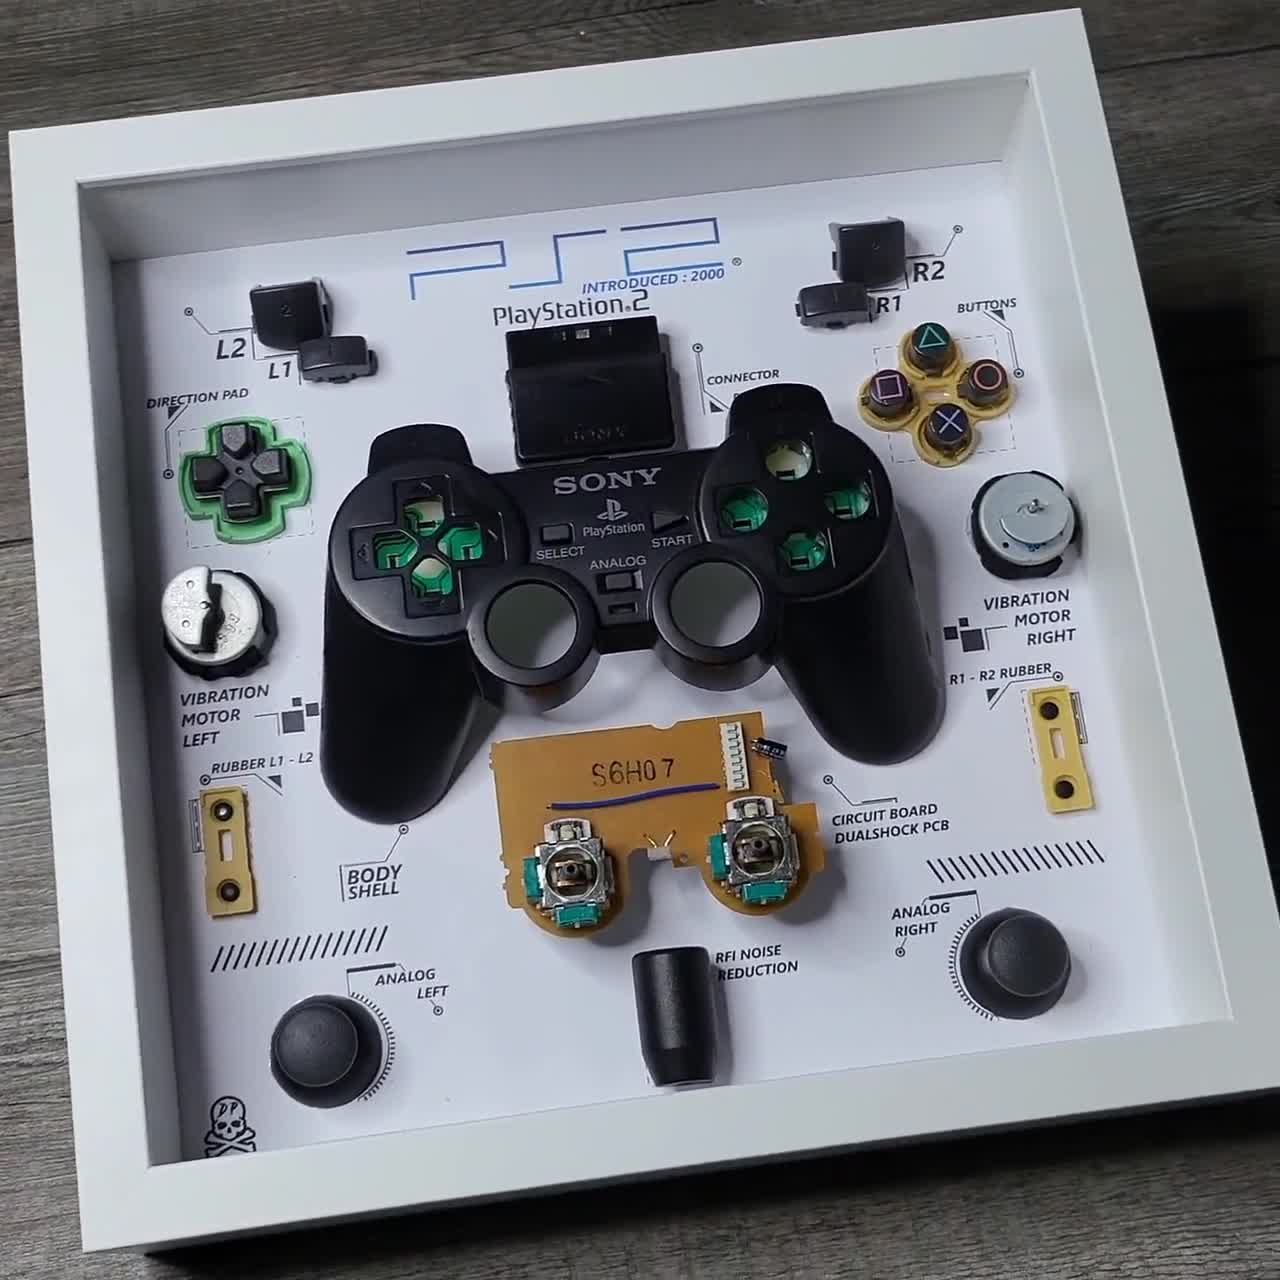 PS5 MINIATURE Console 4 Games And/or Controller With BOX. Handmade Art. 